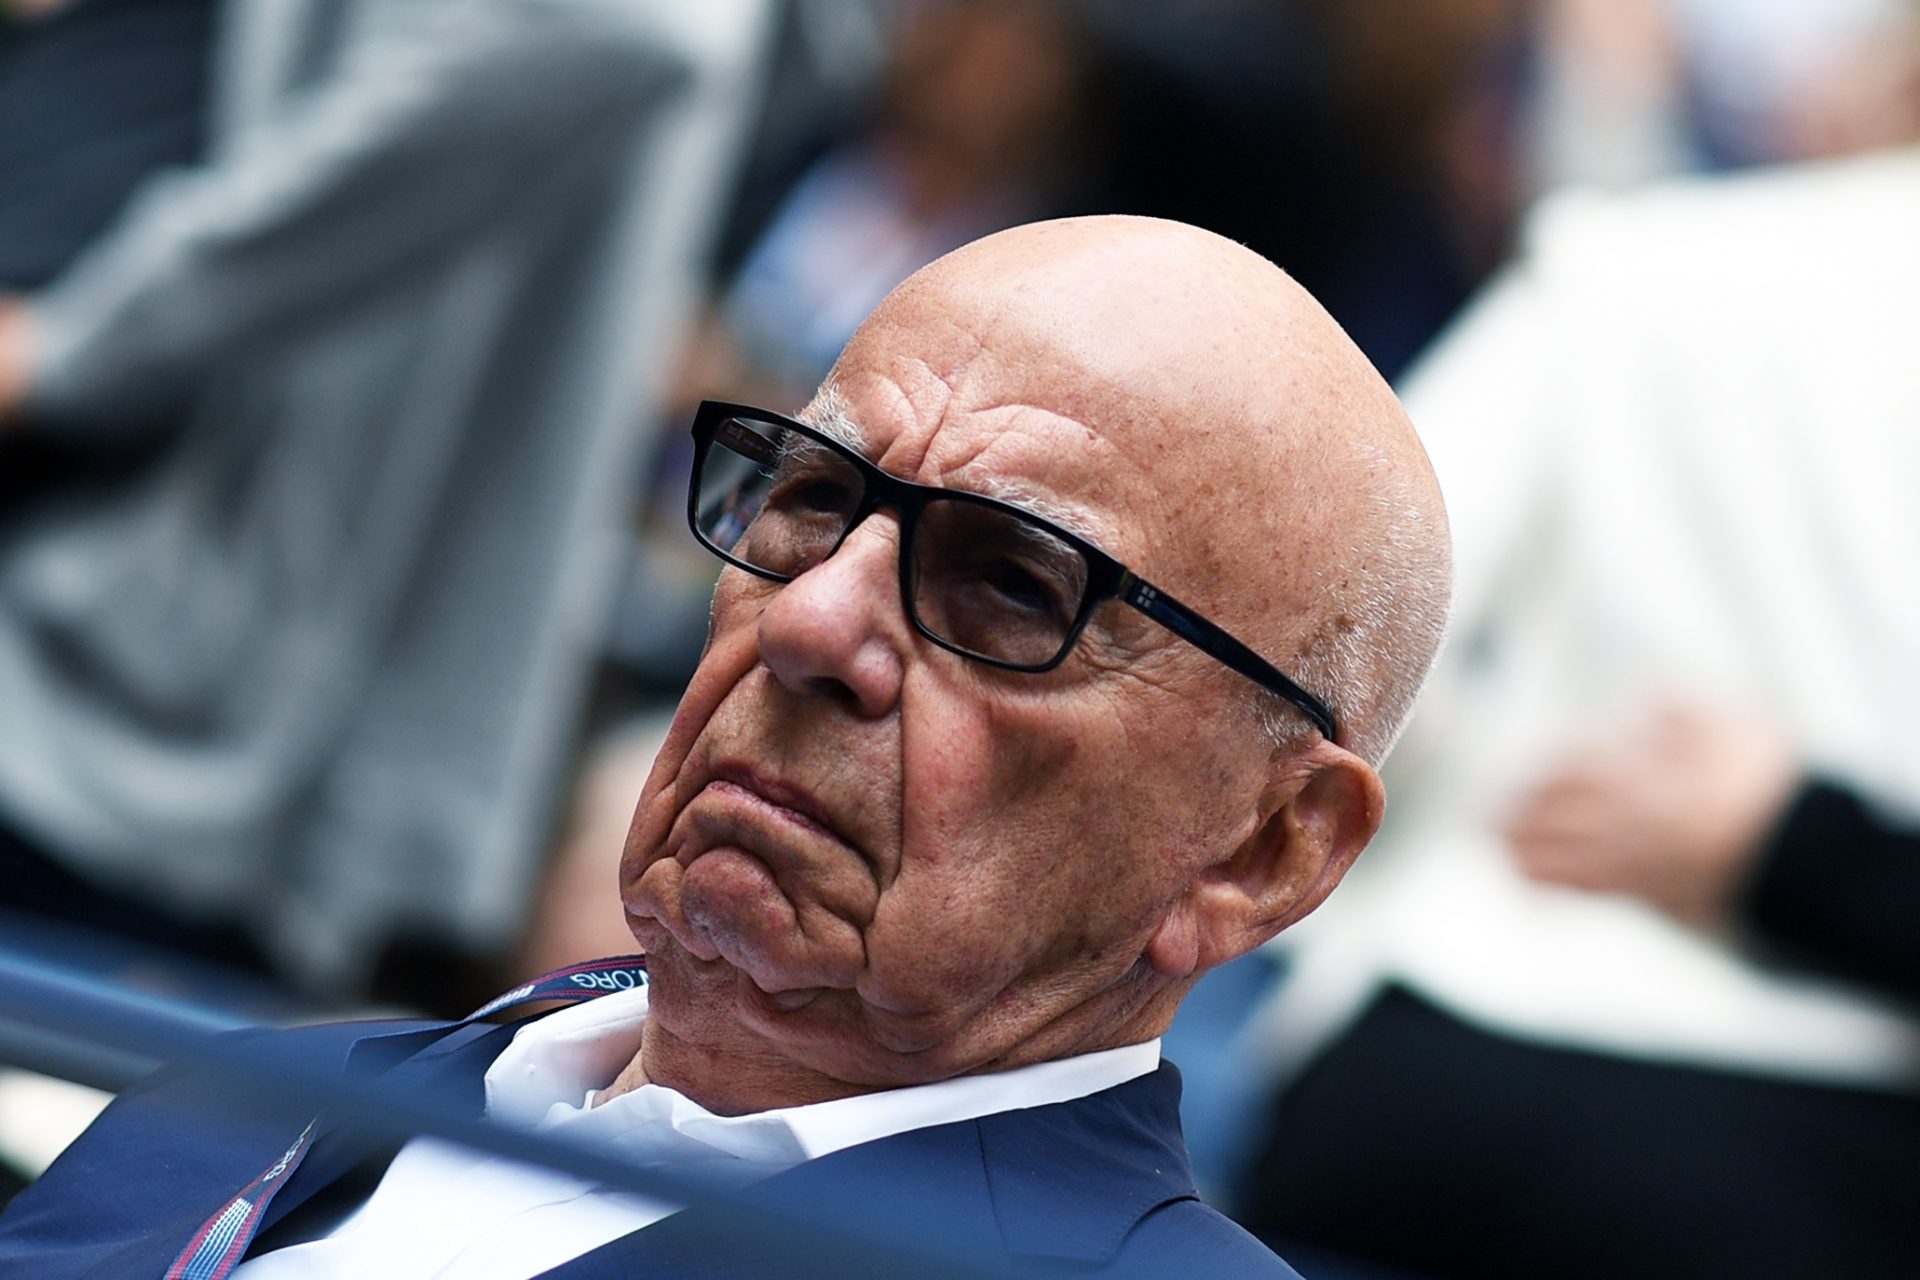 Rupert Murdoch “privately acknowledged” climate alternate — whereas Fox News hosts denied it even existed